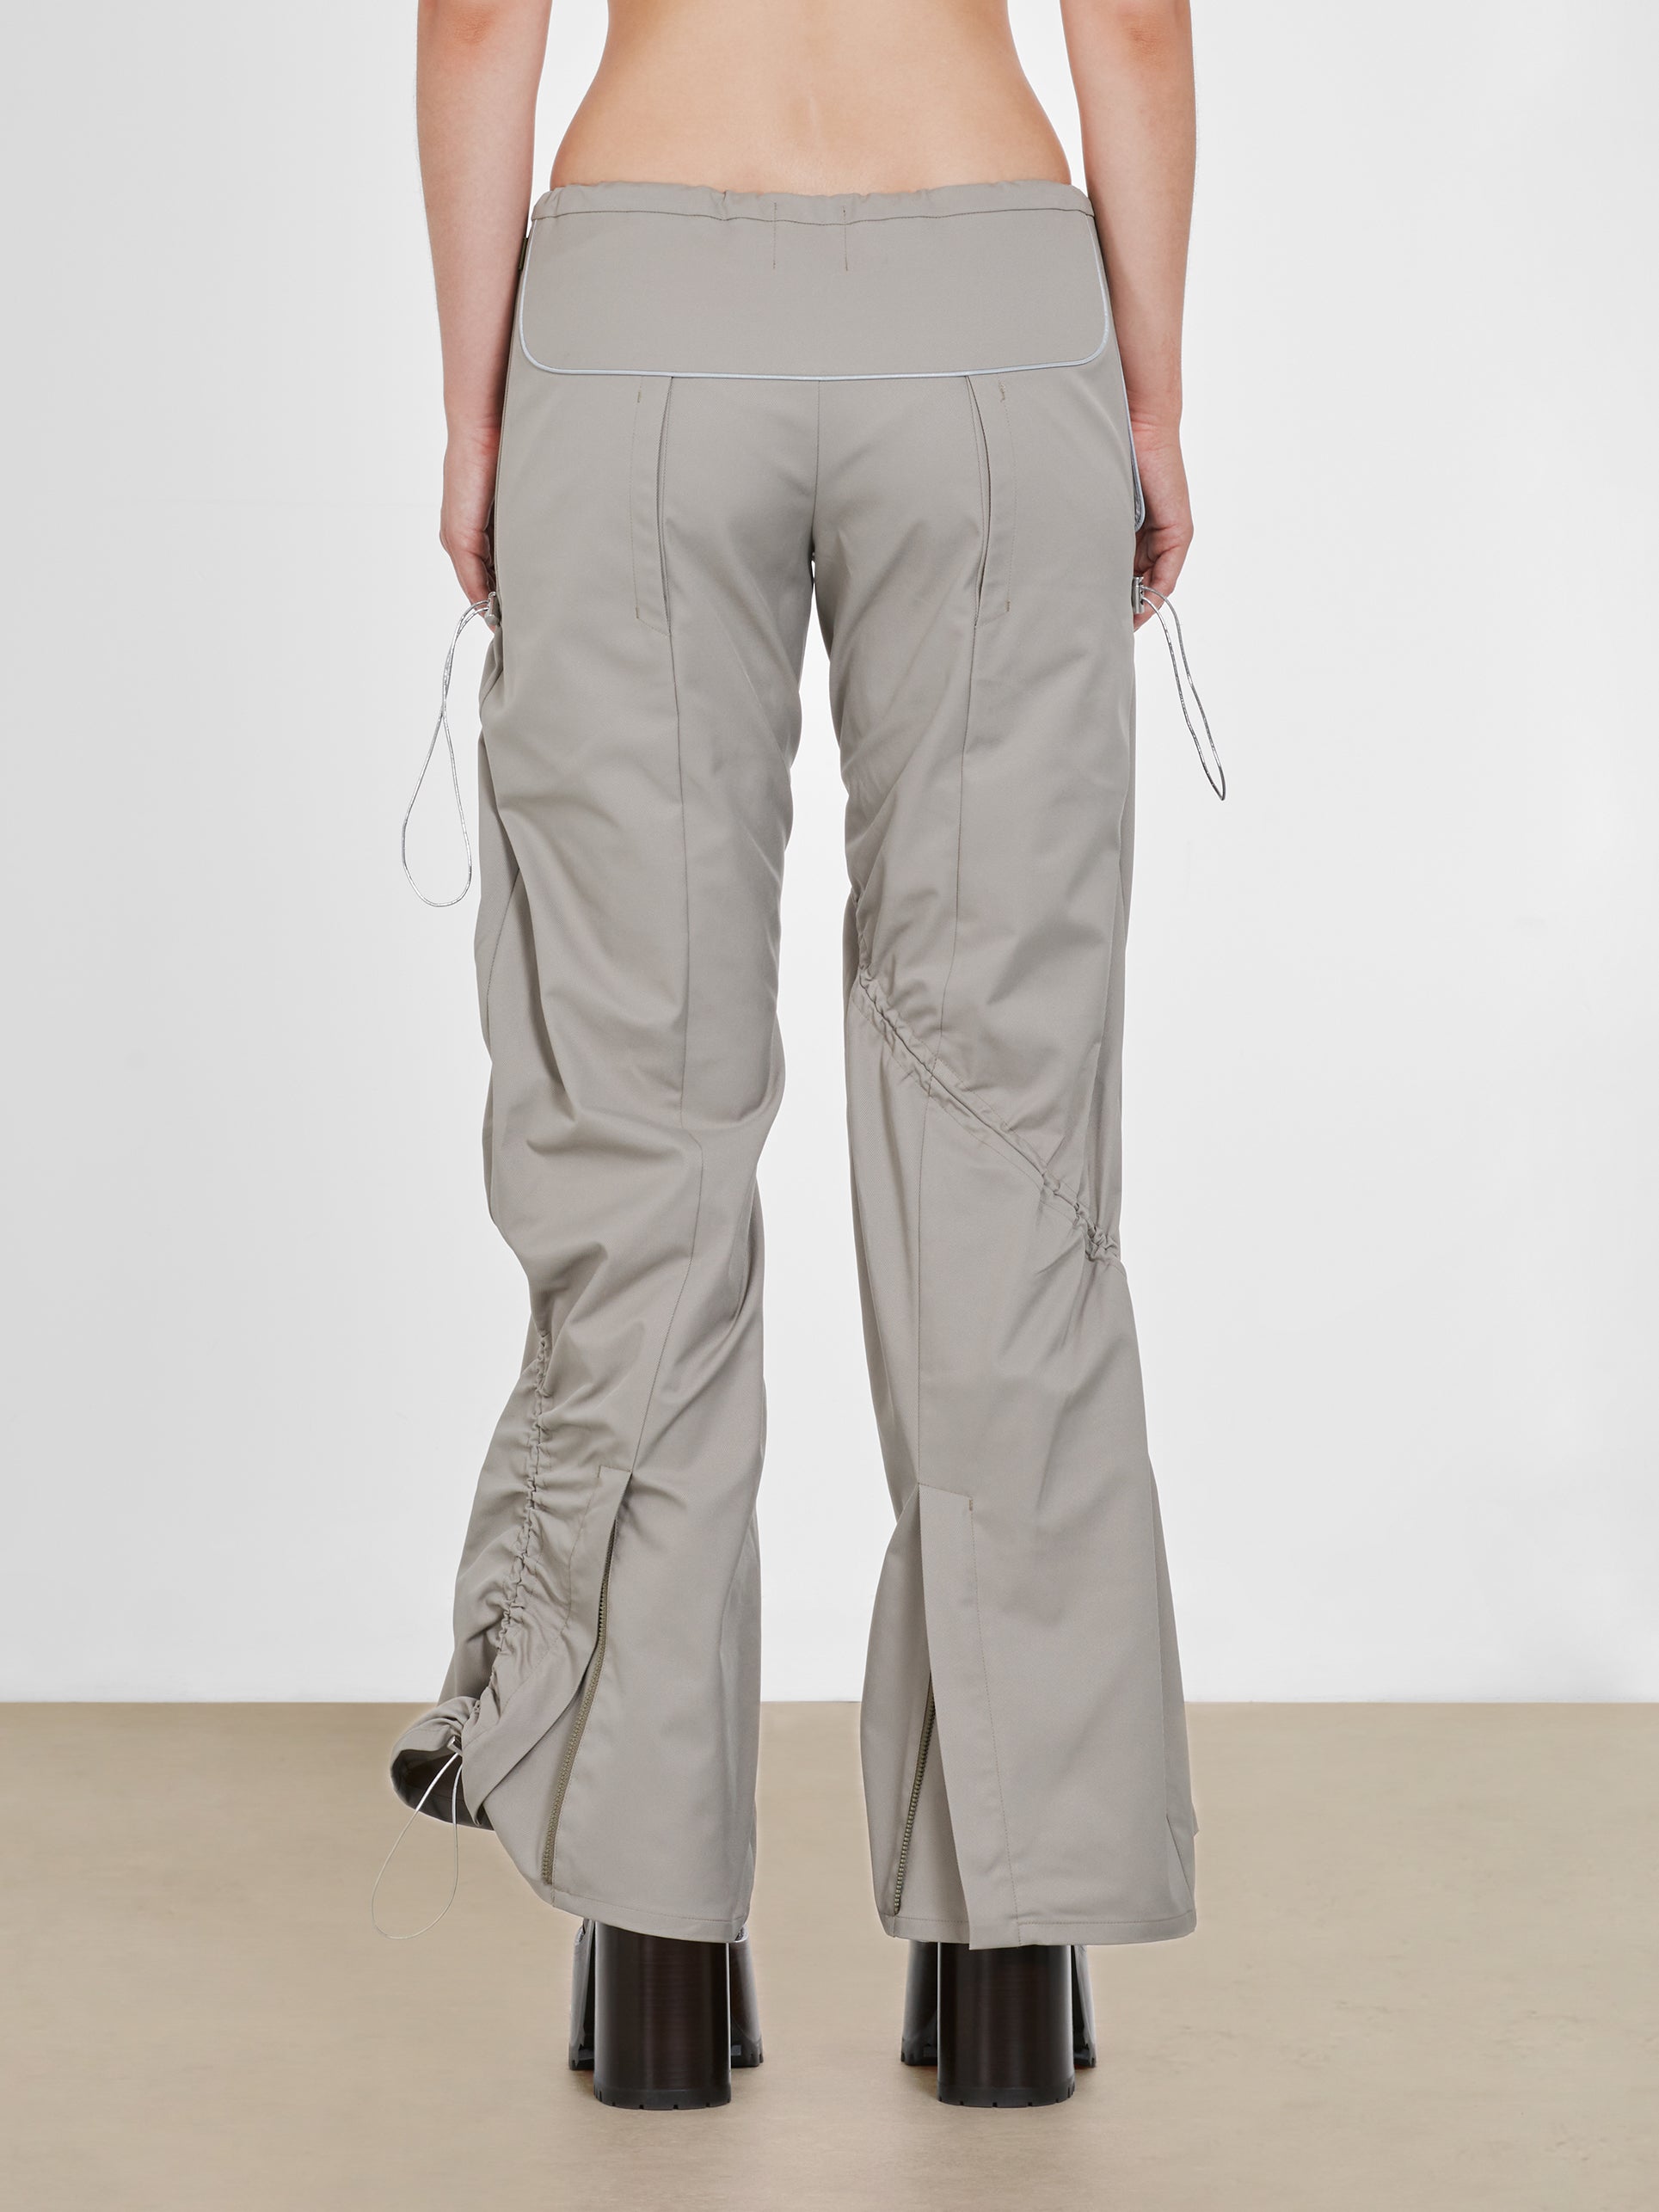 Heaven By Marc Jacobs - Women’s Gathered Wide Leg Pant - (Military) view 3